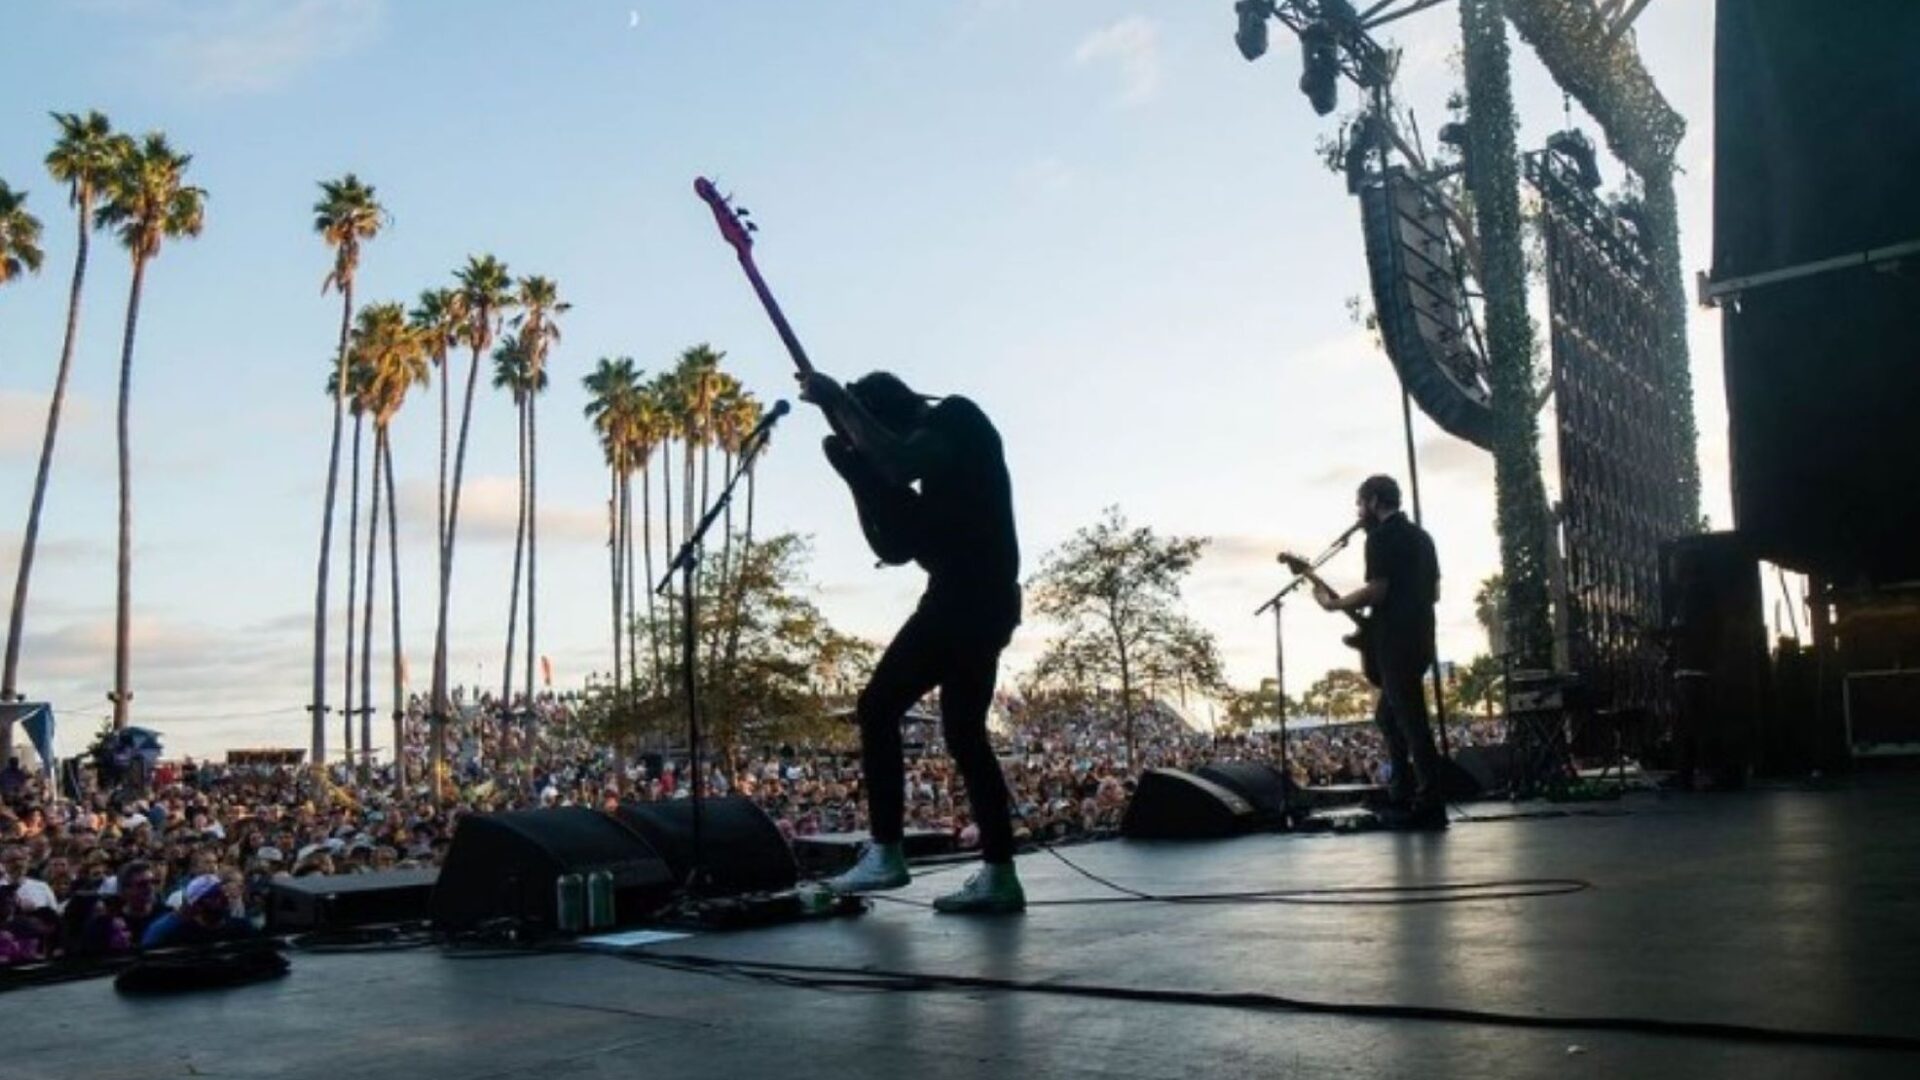 Musicians on stage playing guitar with crowd and palm trees in background